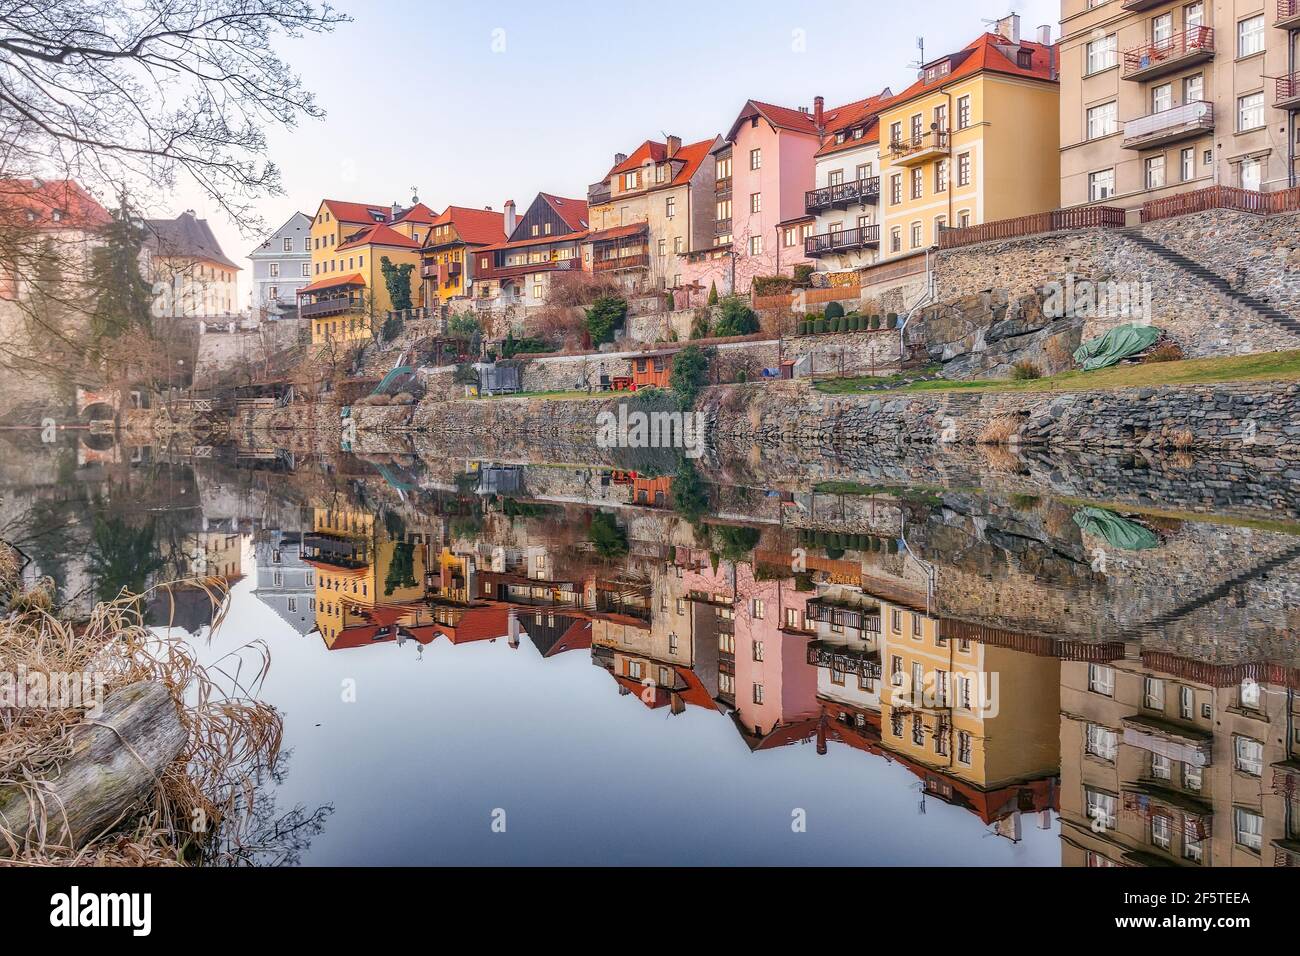 Picturesque view of aged shabby residential buildings reflecting in calm water of river Stock Photo